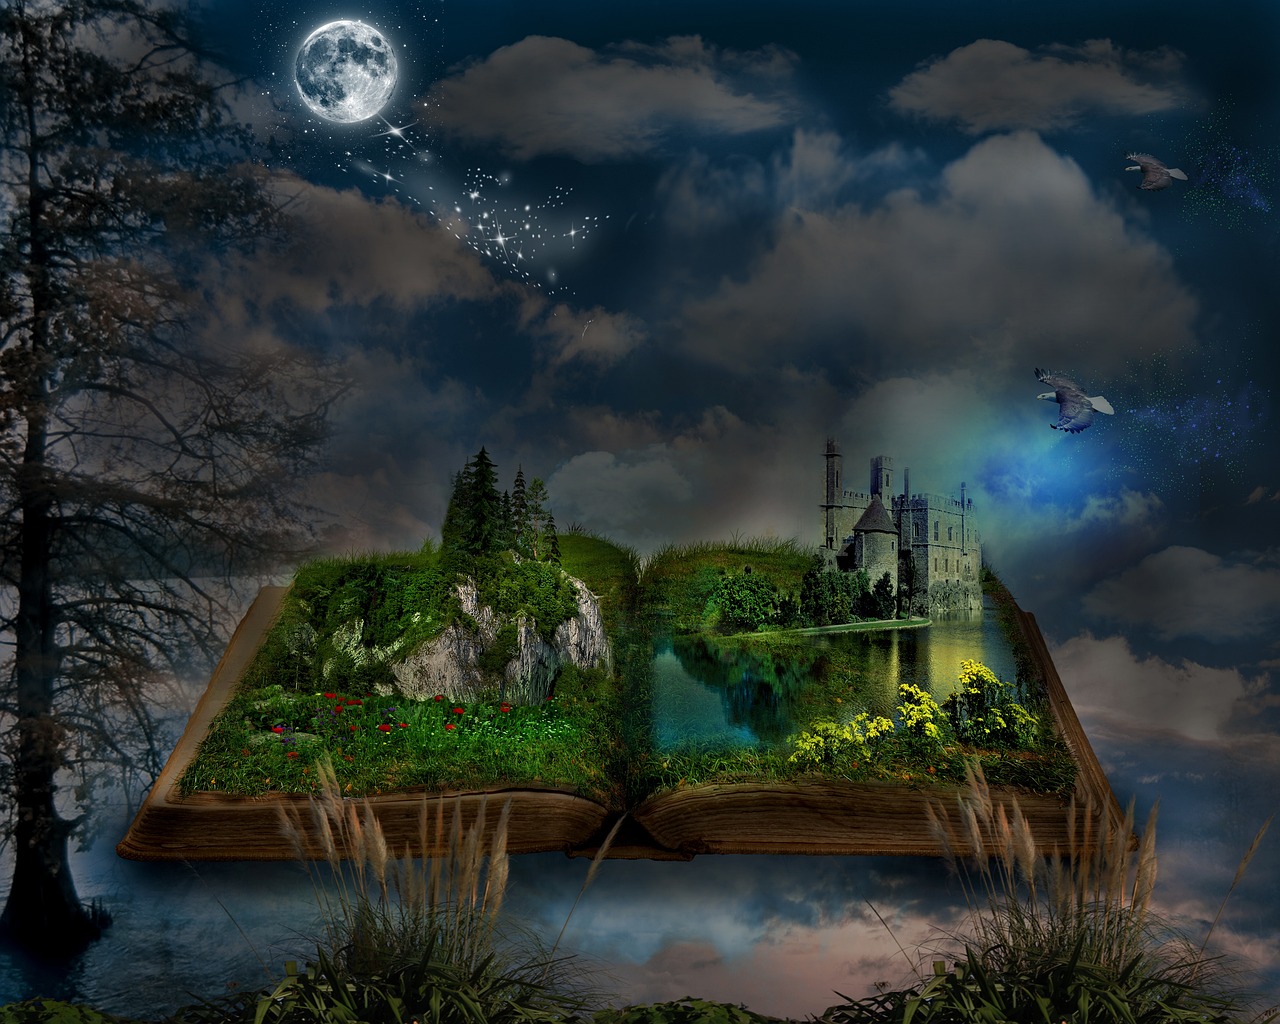 an open book sitting on top of a lush green field, a storybook illustration, inspired by Alexander Jansson, magical realism, mid shot photo, nighttime foreground, very detailed photo, vacation photo